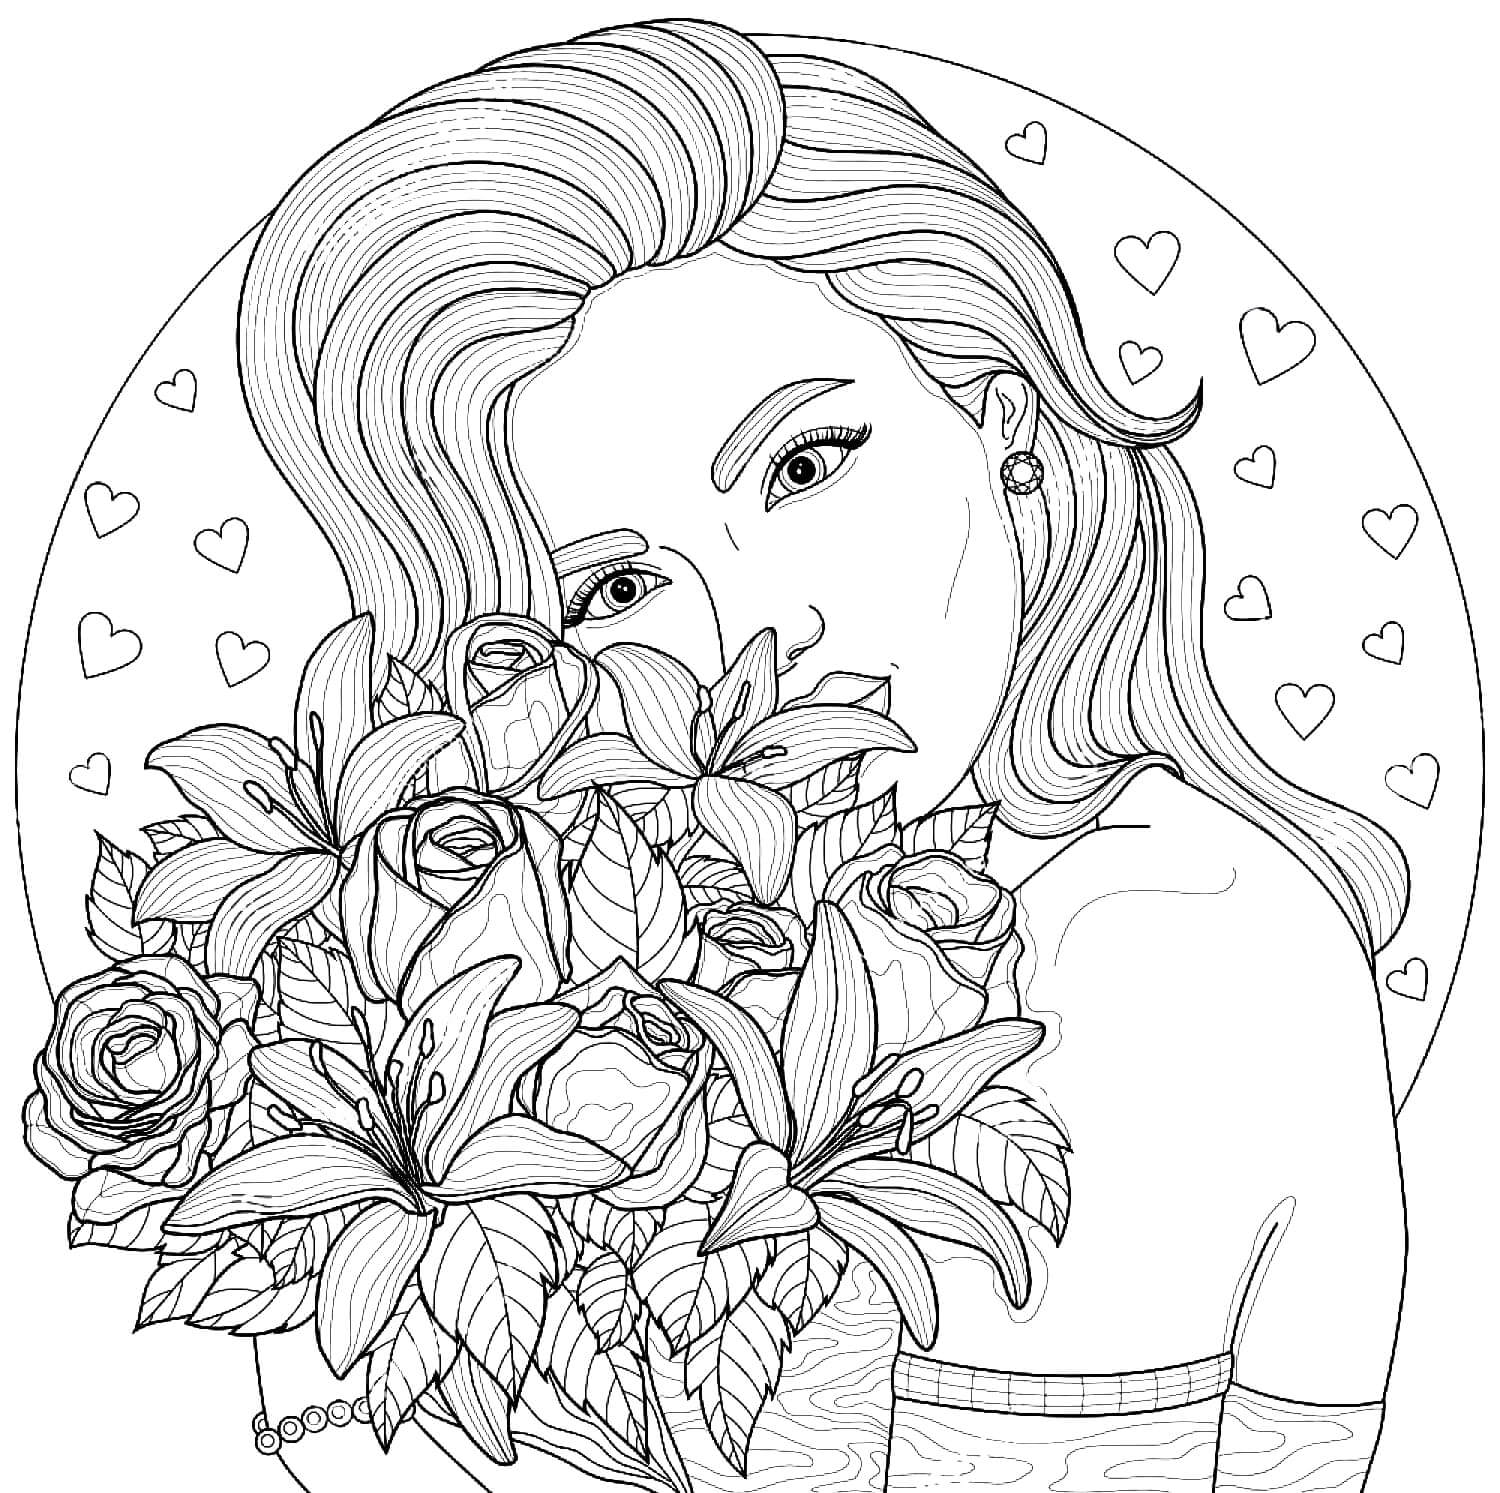 relaxation flower coloring pages for adults | butterfly and flower coloring pages for adults | free printable flower coloring pages for adults advanced